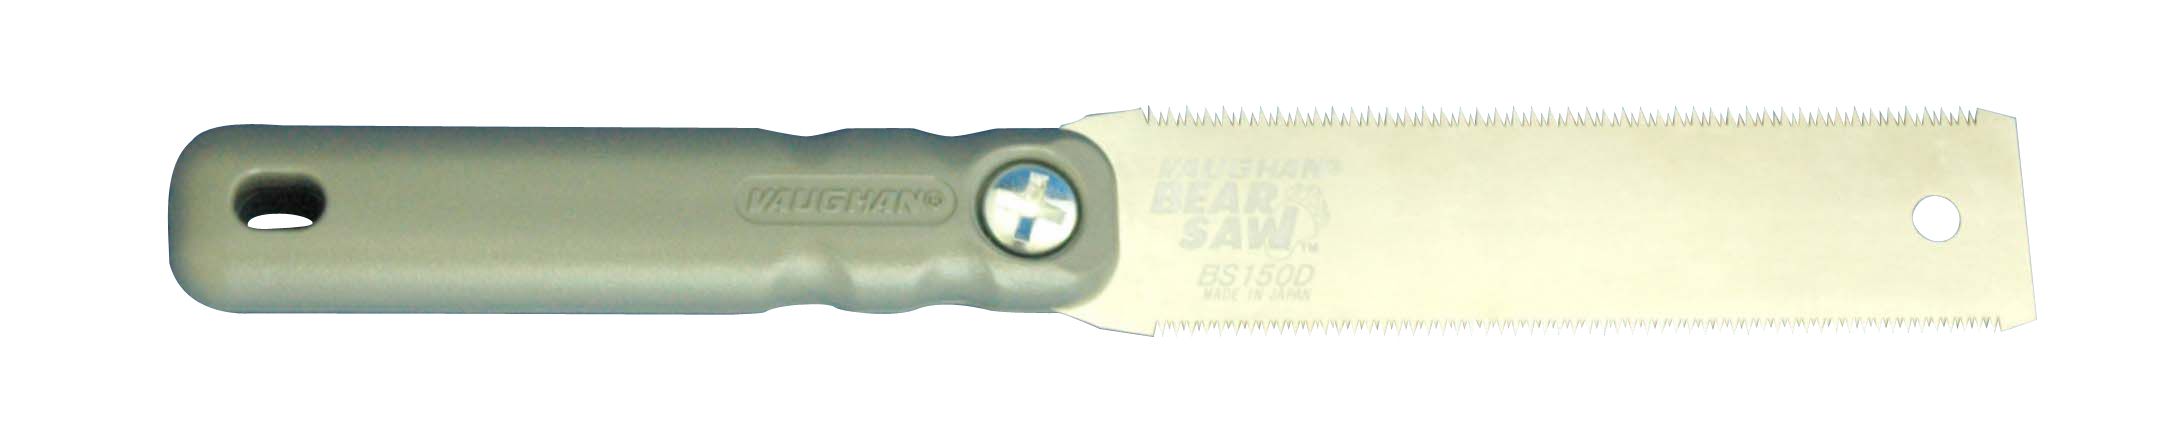 5-1/2 in. Mini Saw with Double-Edged Blade